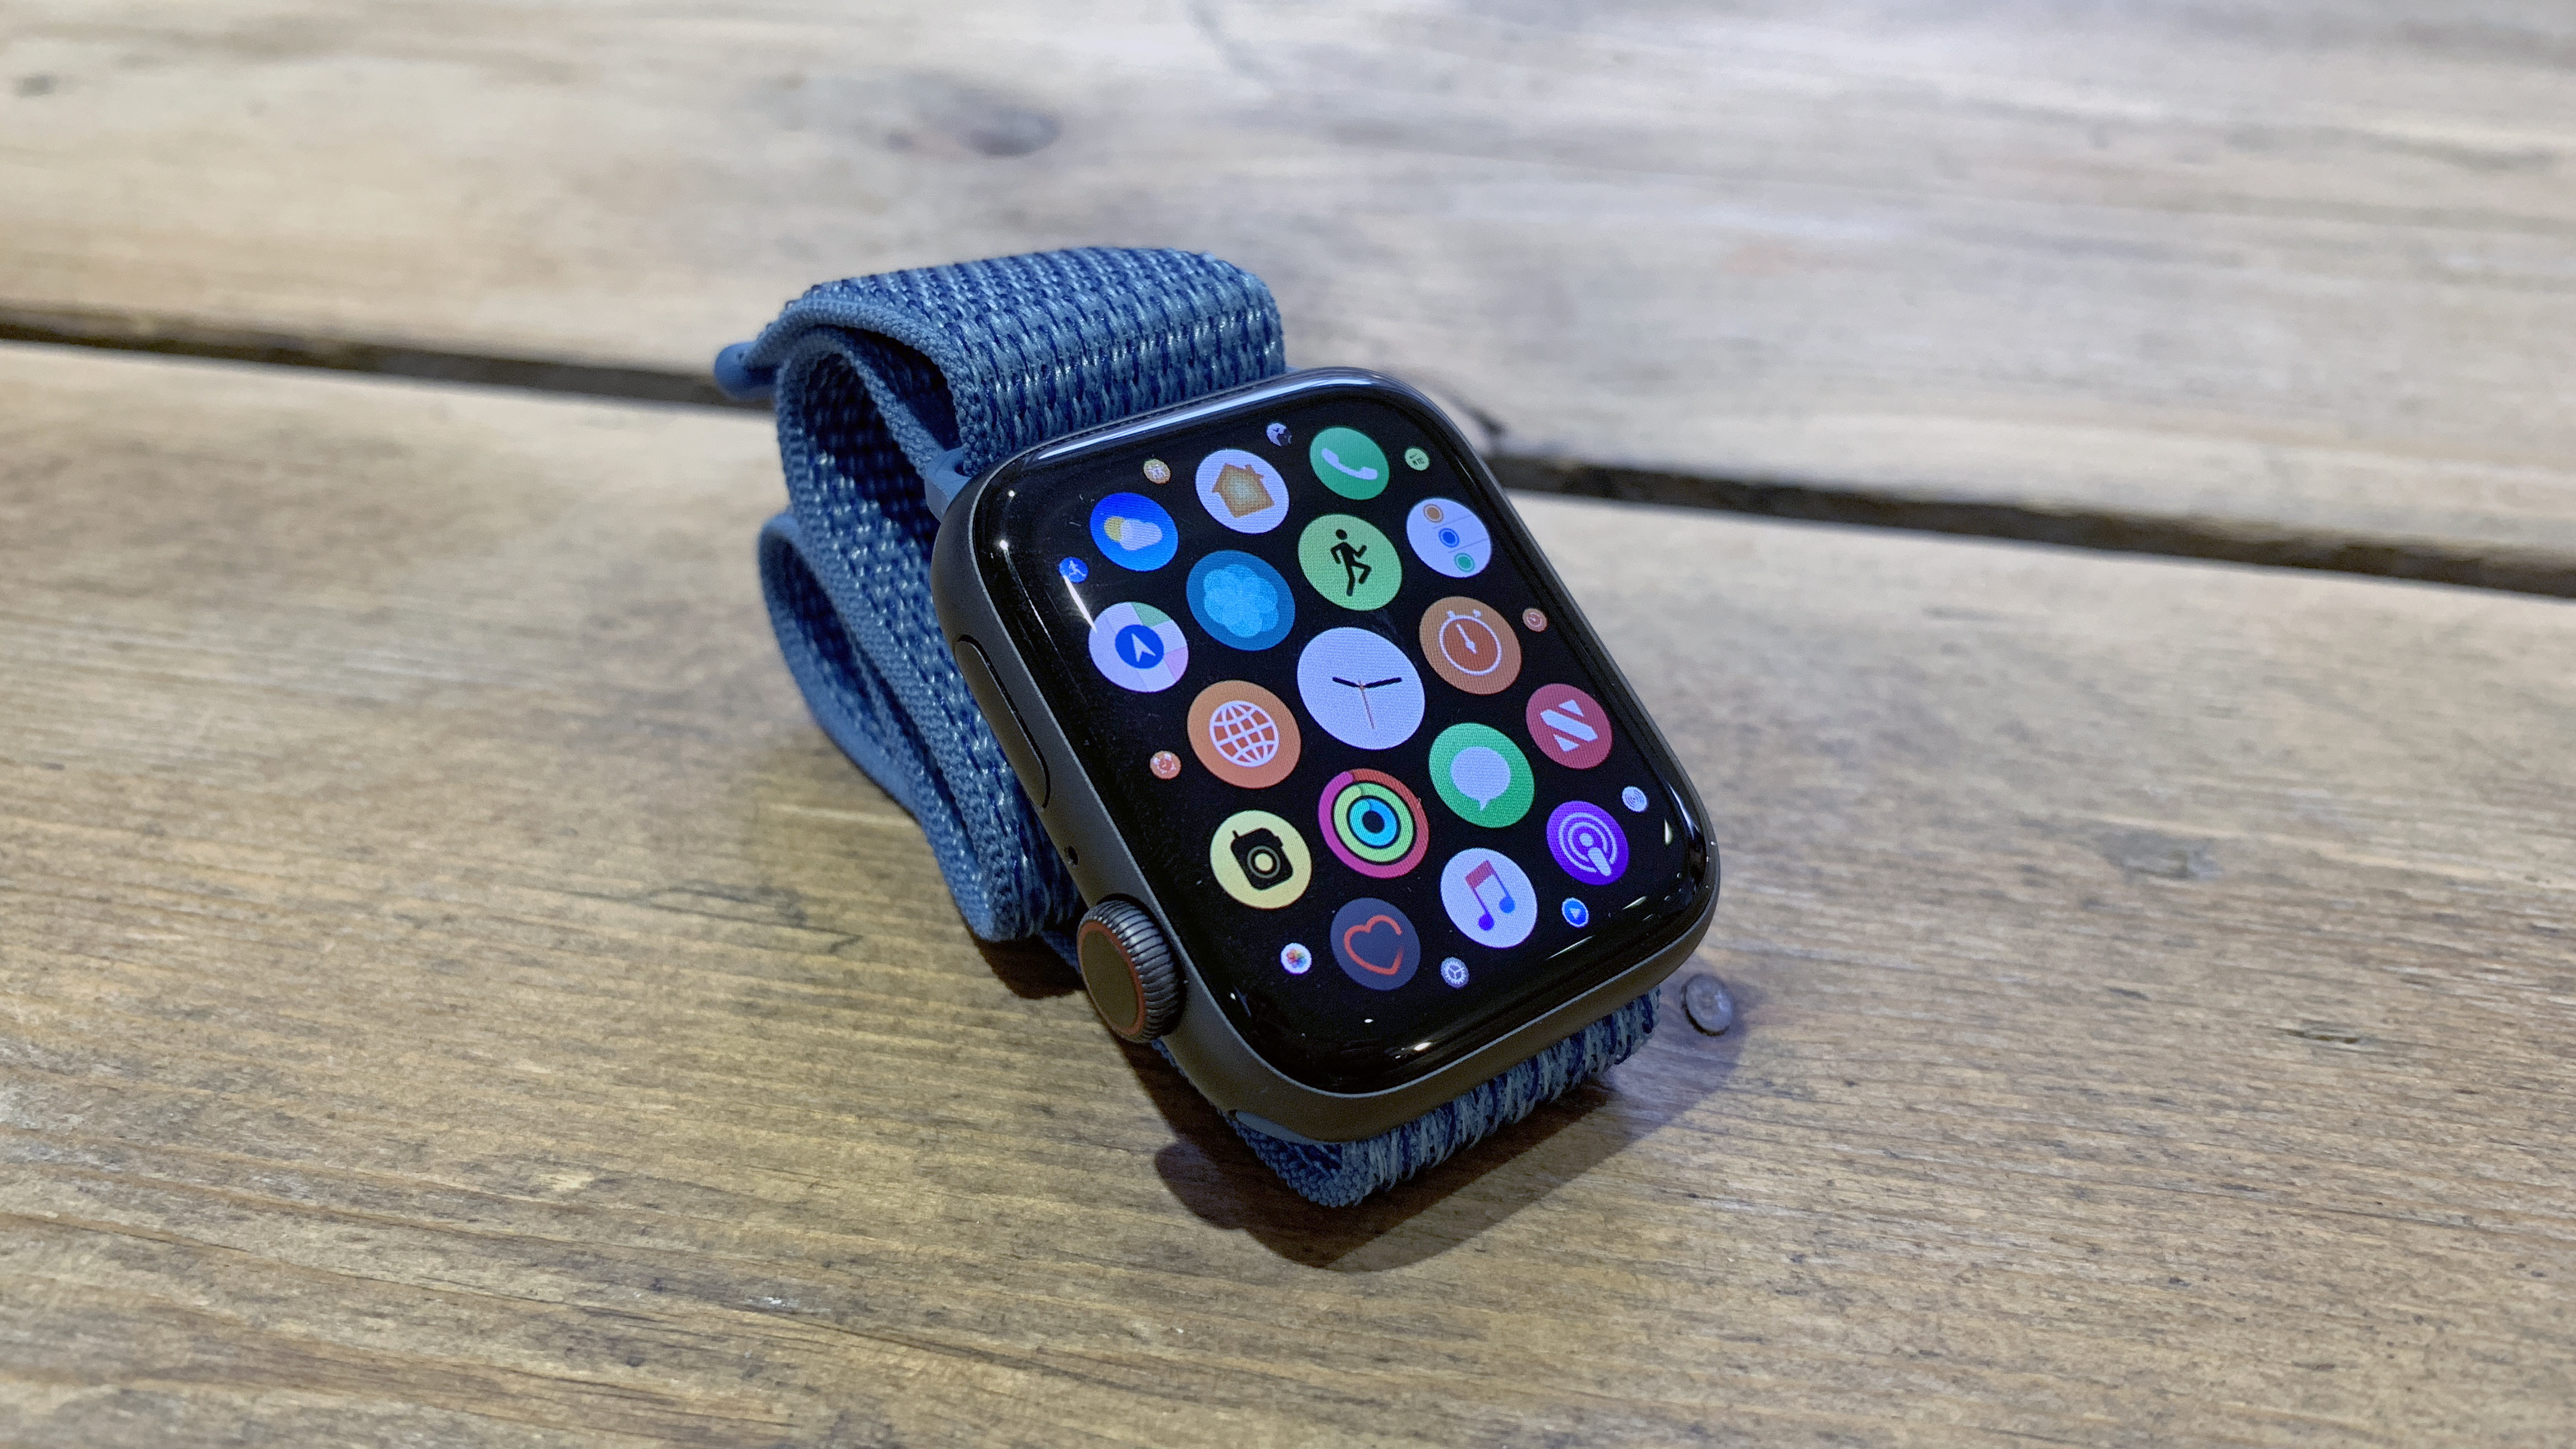 Image result for FUTURE APPS FOR THE APPLE WATCH THAT WE WANT TO SEE